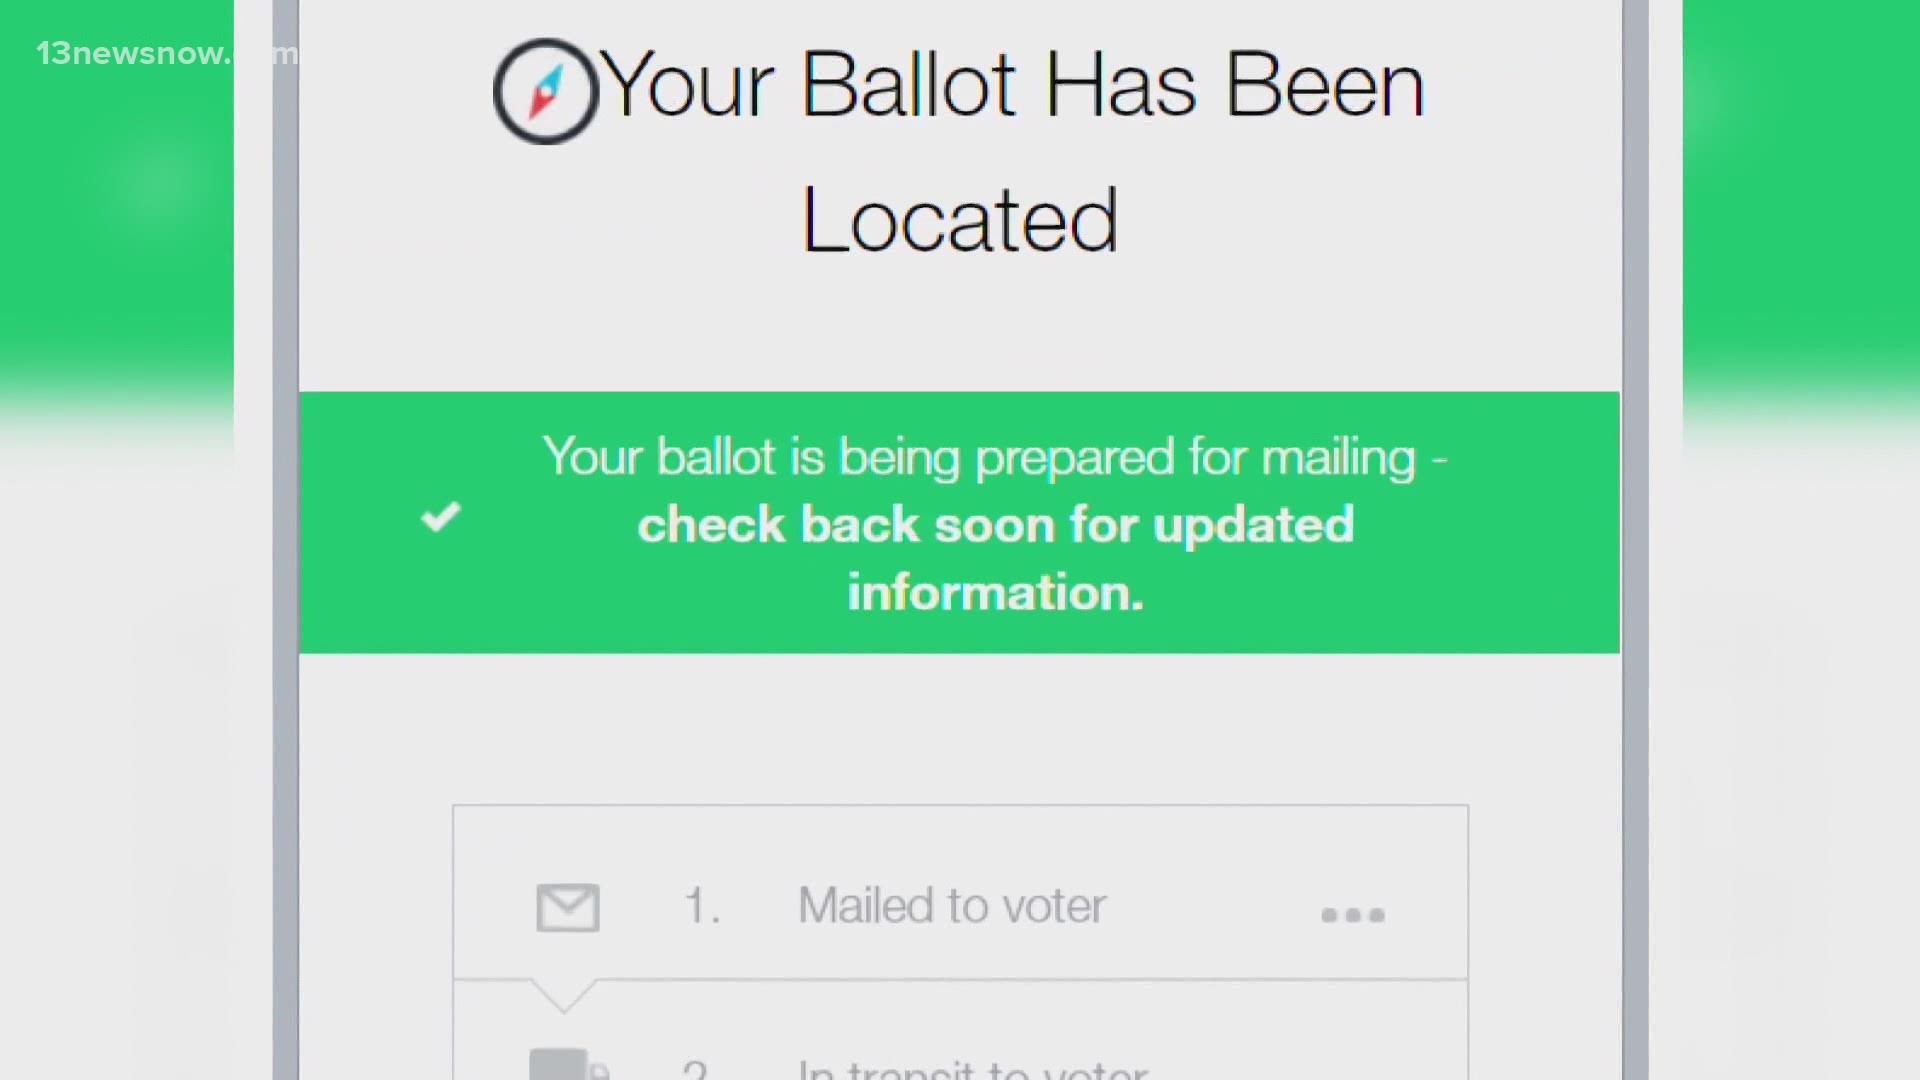 The North Carolina State Board of Elections just launched BallotTrax, an online program for voters to make sure their ballot is mailed, received, and counted.